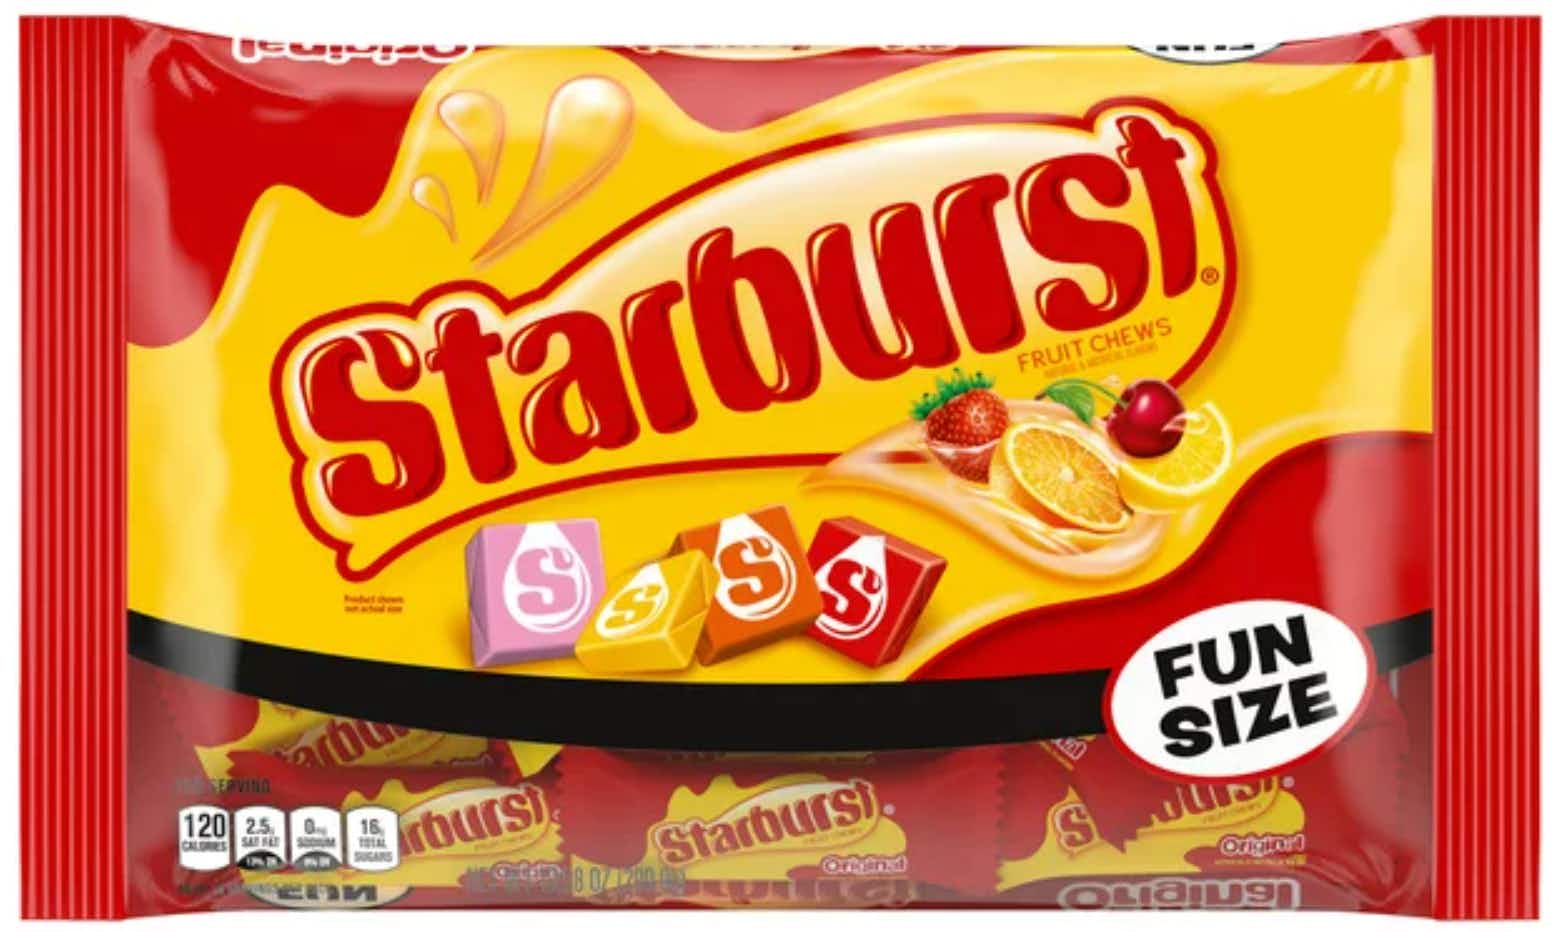 Starburst fun size candy package.